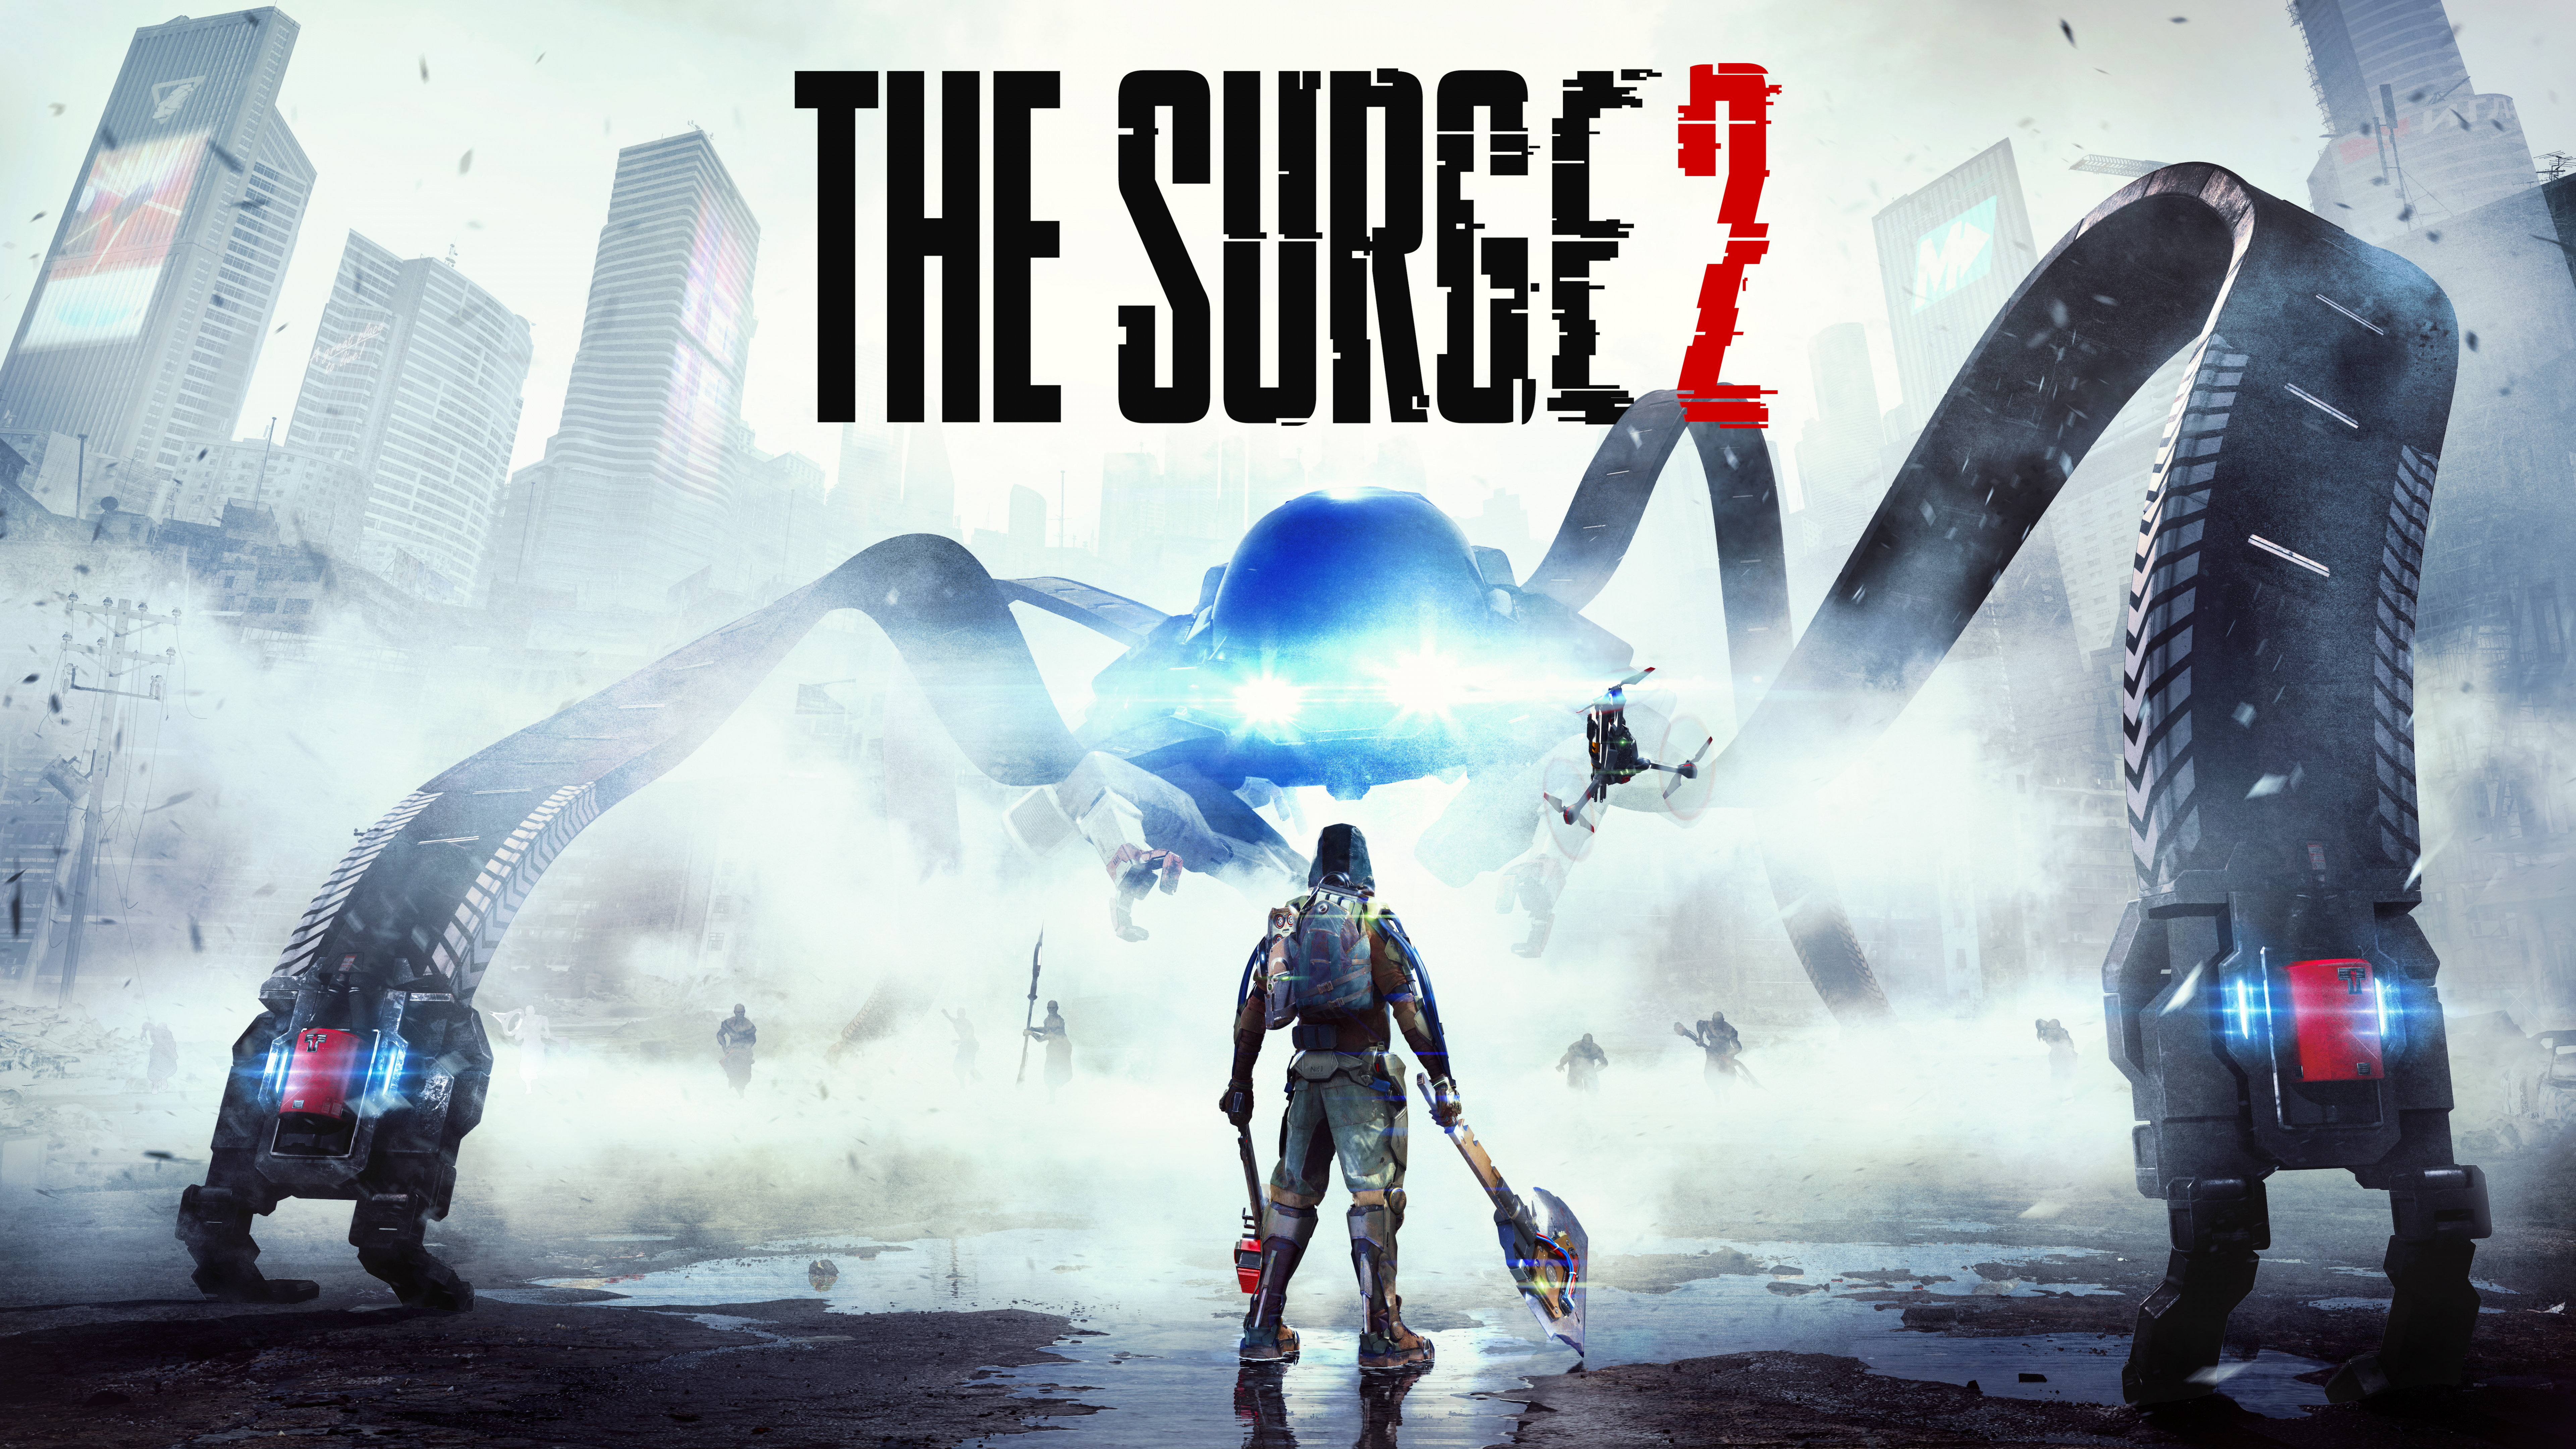 The Surge 2, The Surge, Deck13, Focus Home Interactive, Playstation 4. Wallpaper in 7680x4320 Resolution